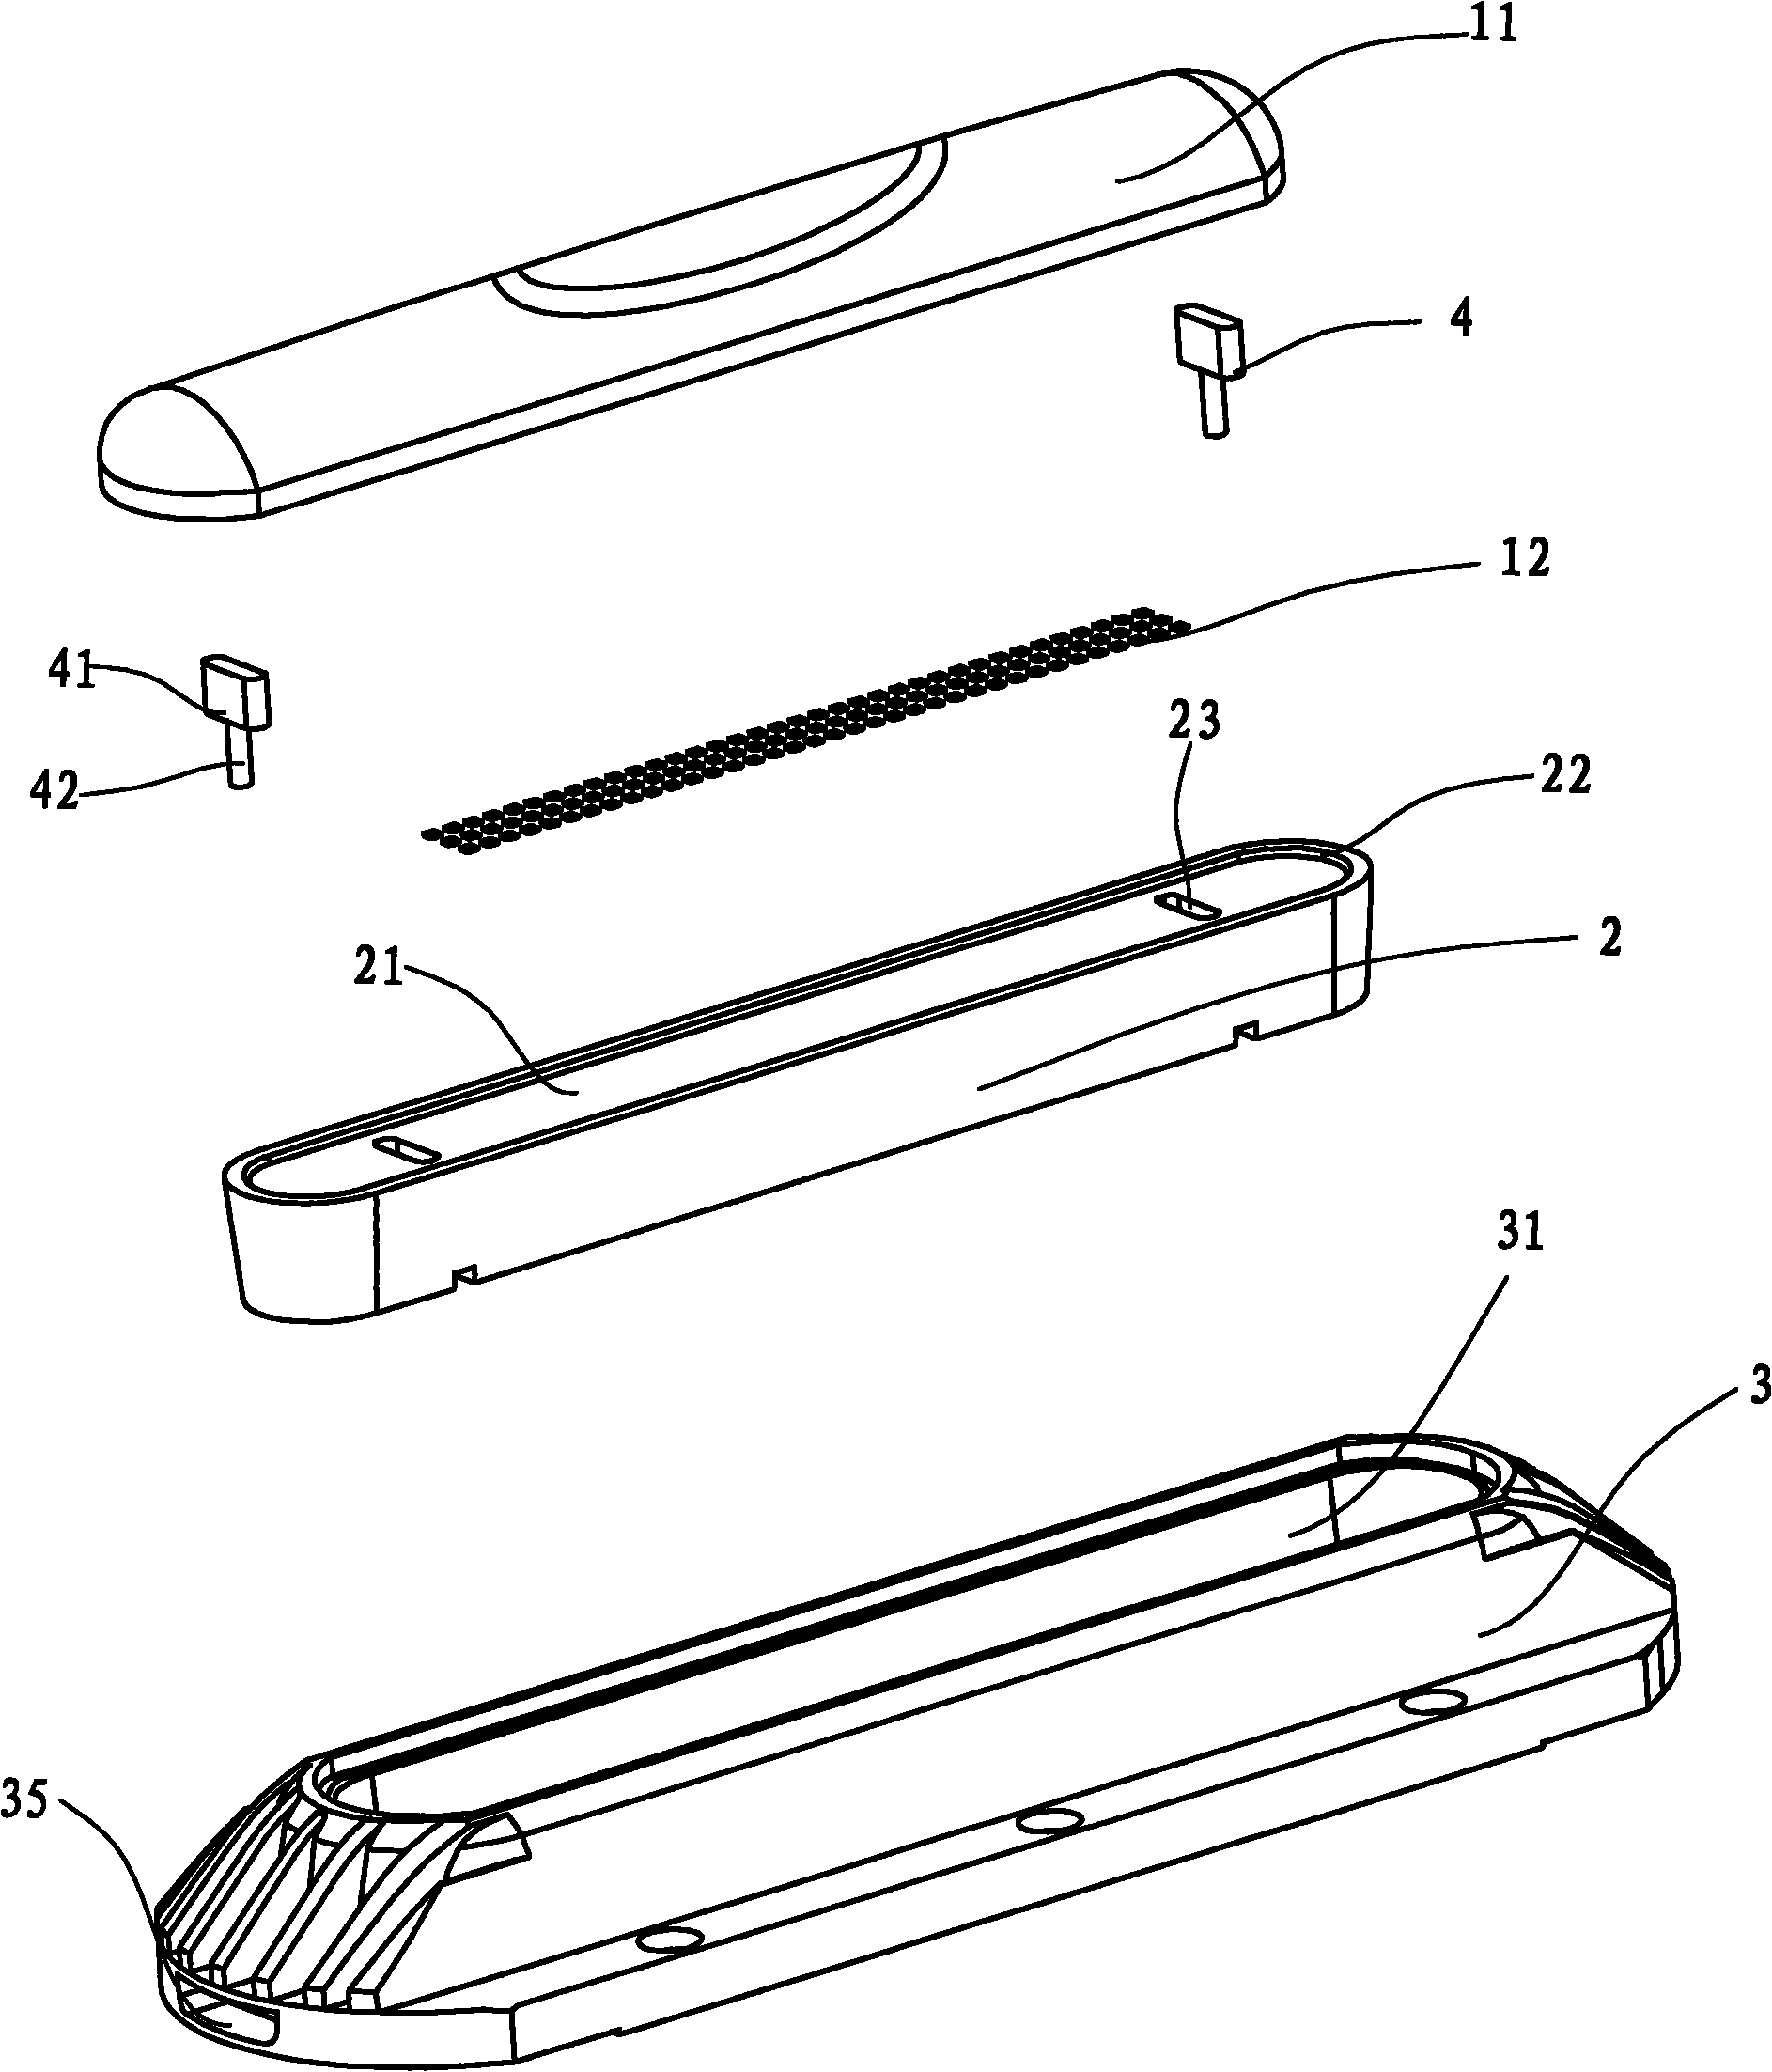 Embedded package structure of LED light source